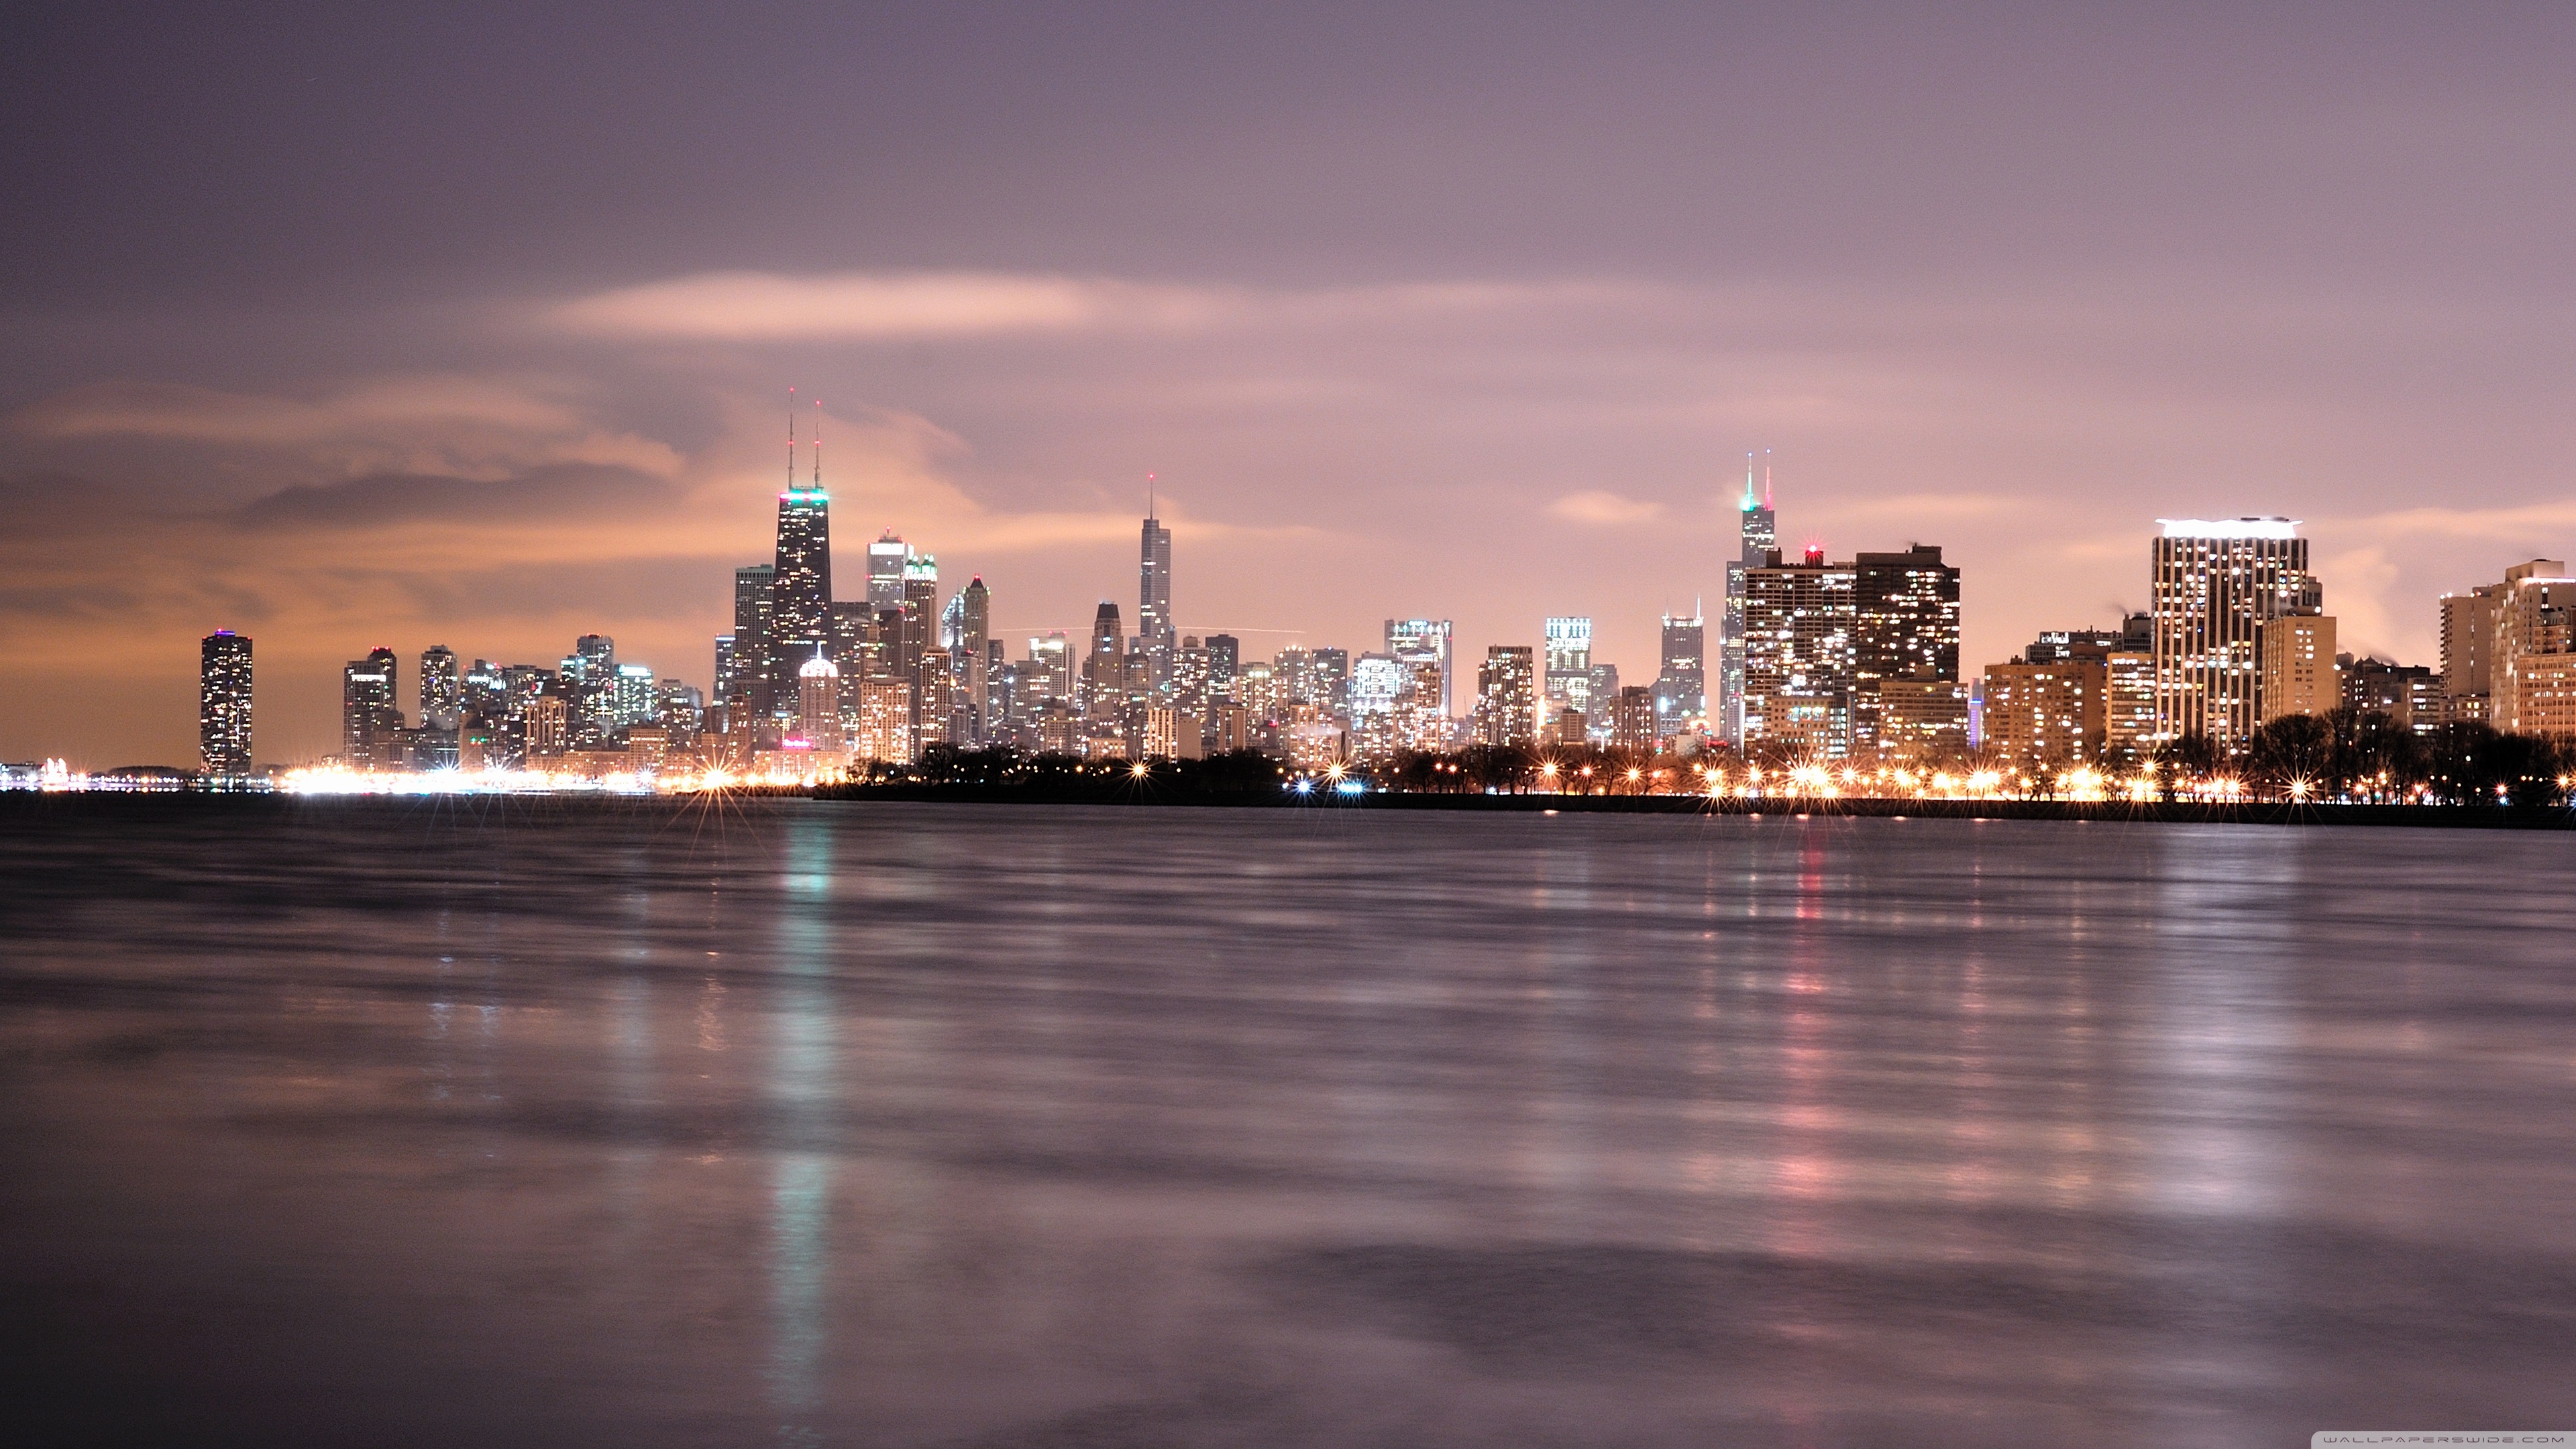 Chicago: Was founded near a portage between the Great Lakes and the Mississippi River watershed. 3840x2160 4K Wallpaper.